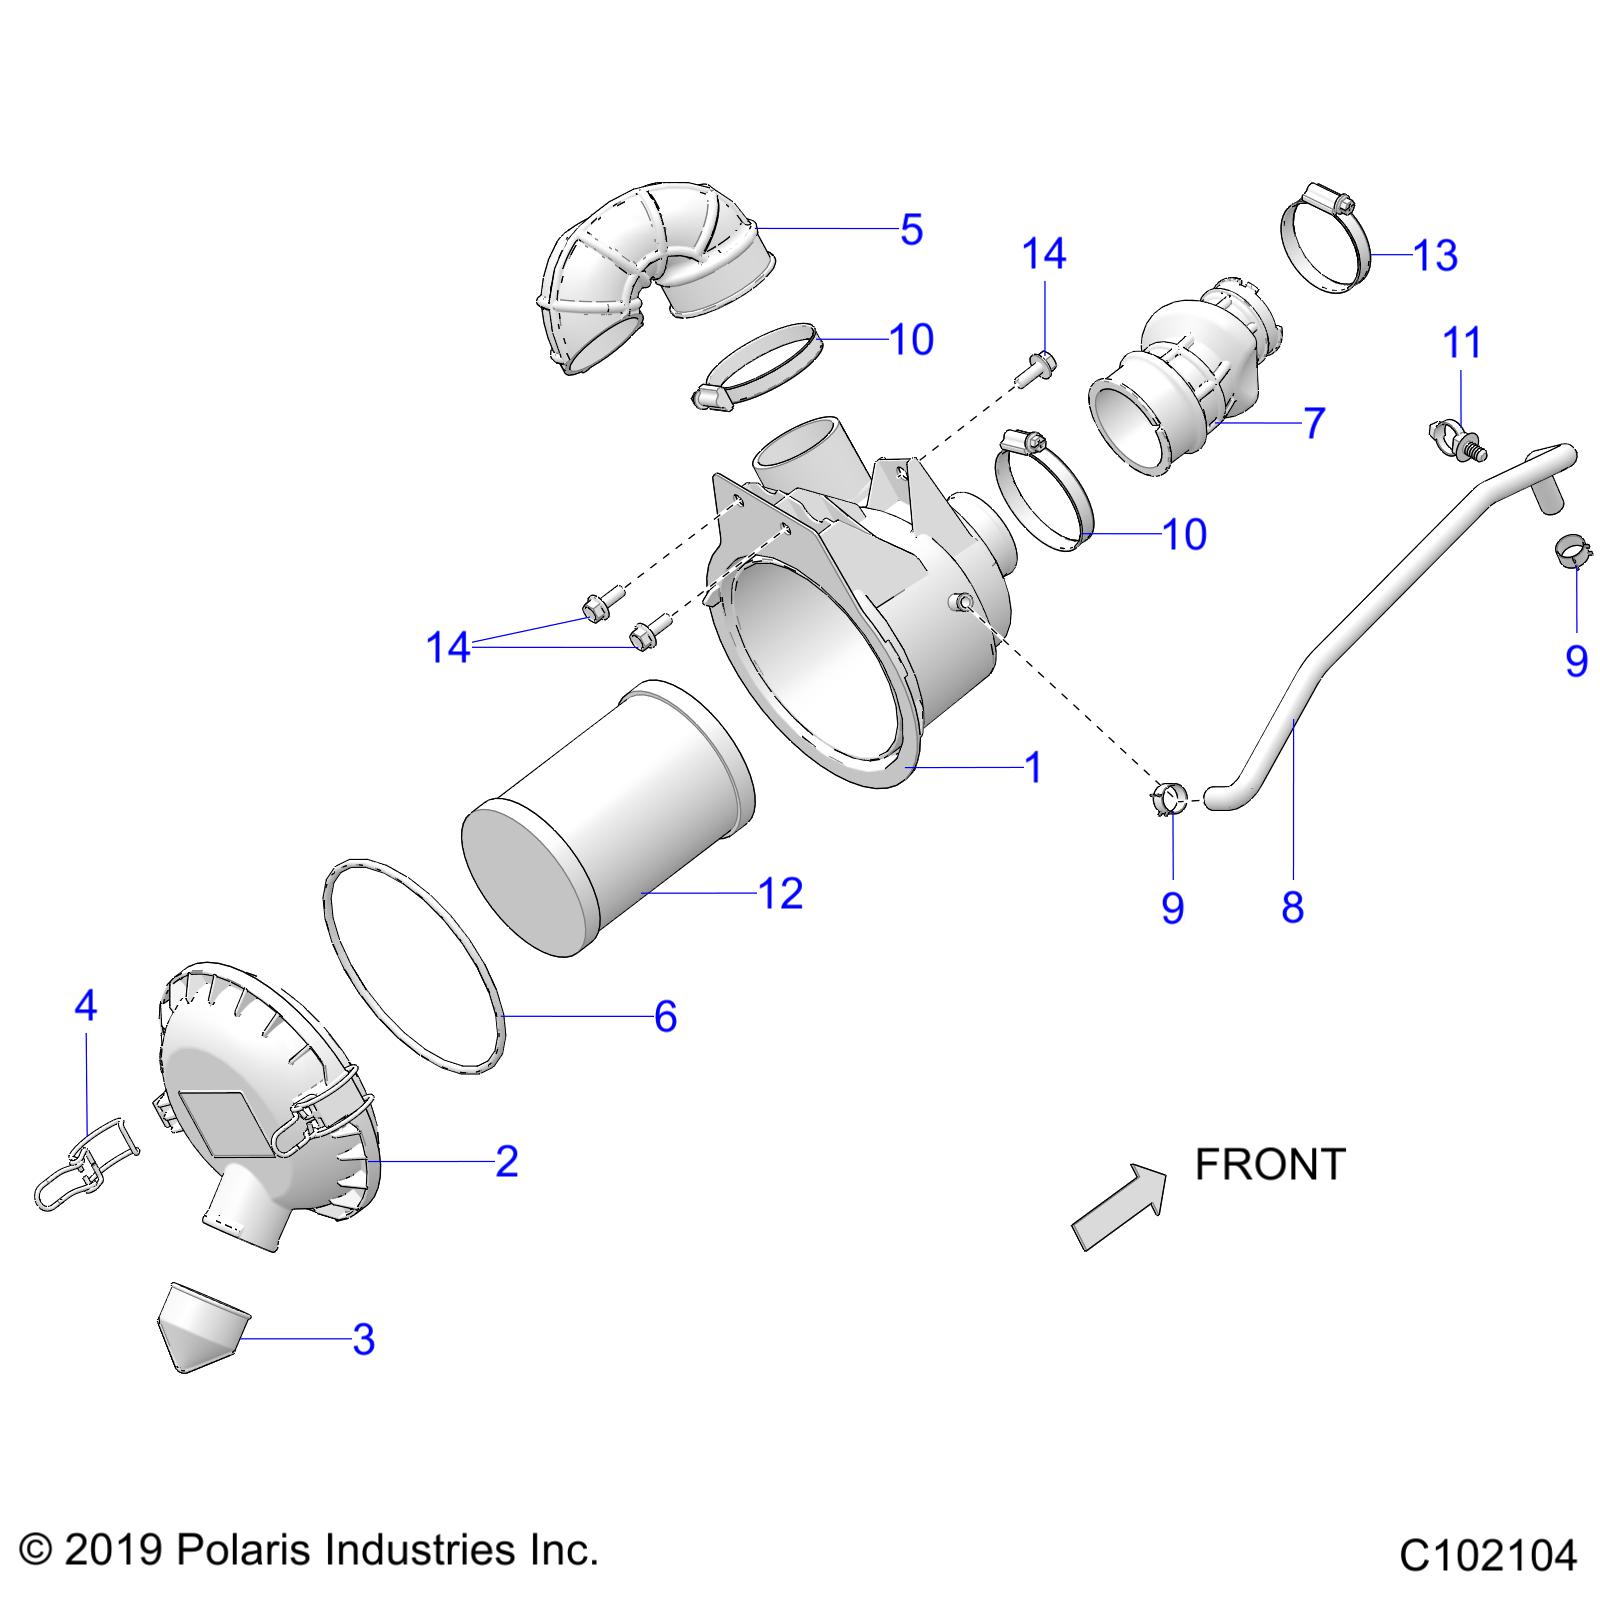 Part Number : 5417066 HOSE-AIRBOX TO THROTTLE BODY